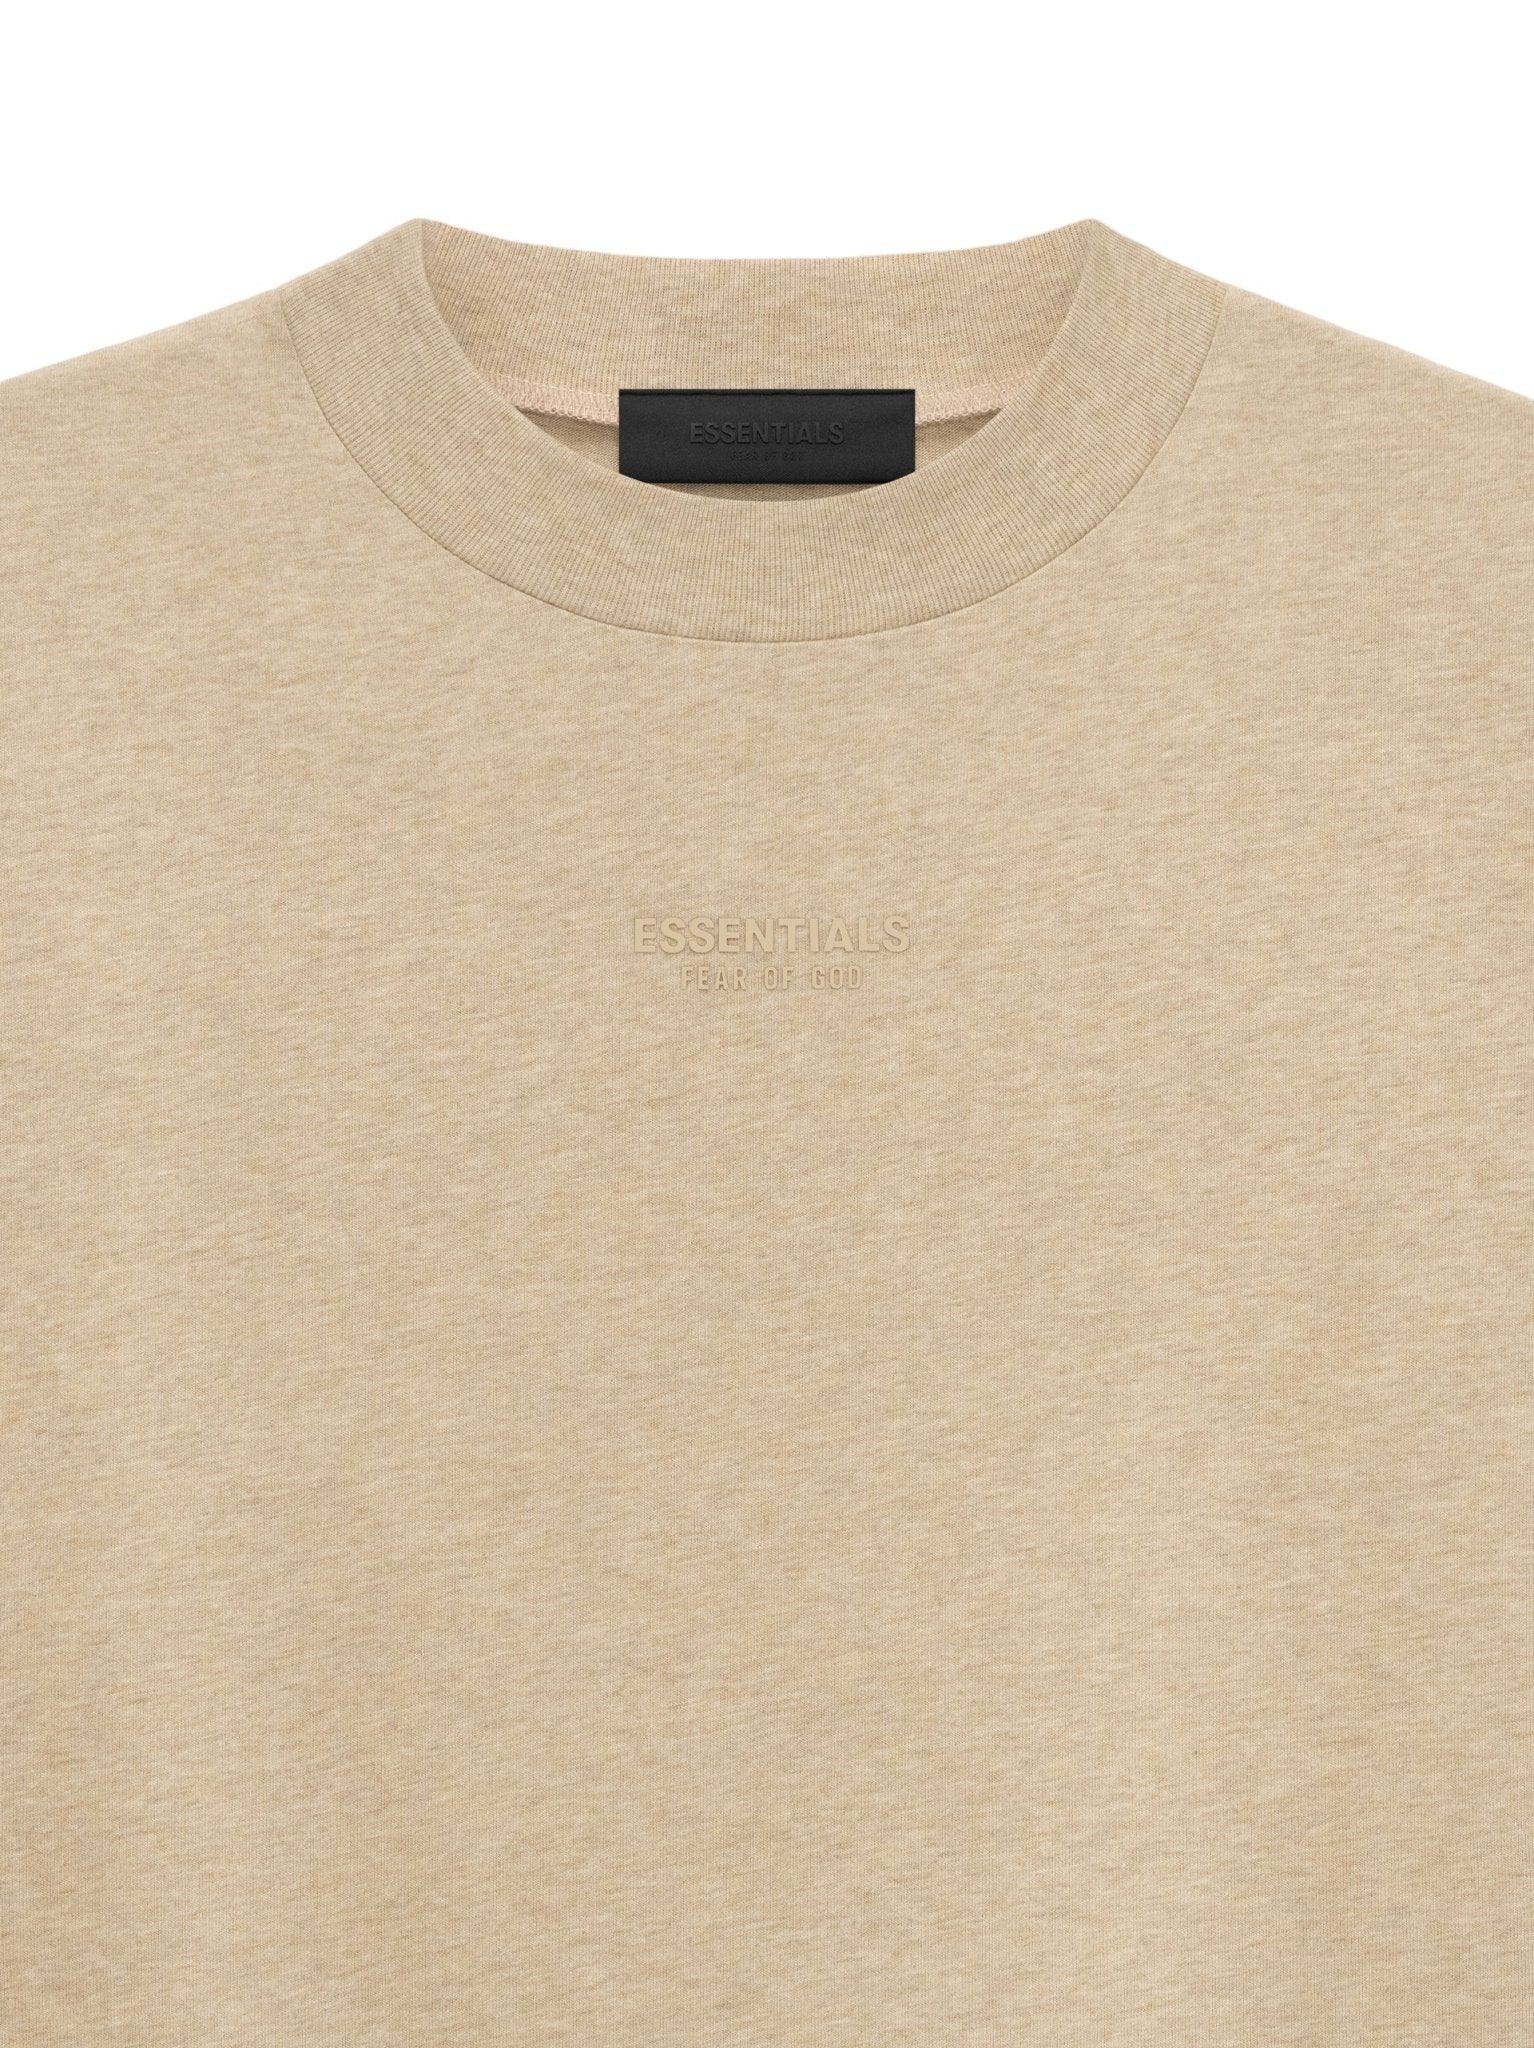 Fear of God Essentials T-shirt Gold Heather - Supra Sneakers